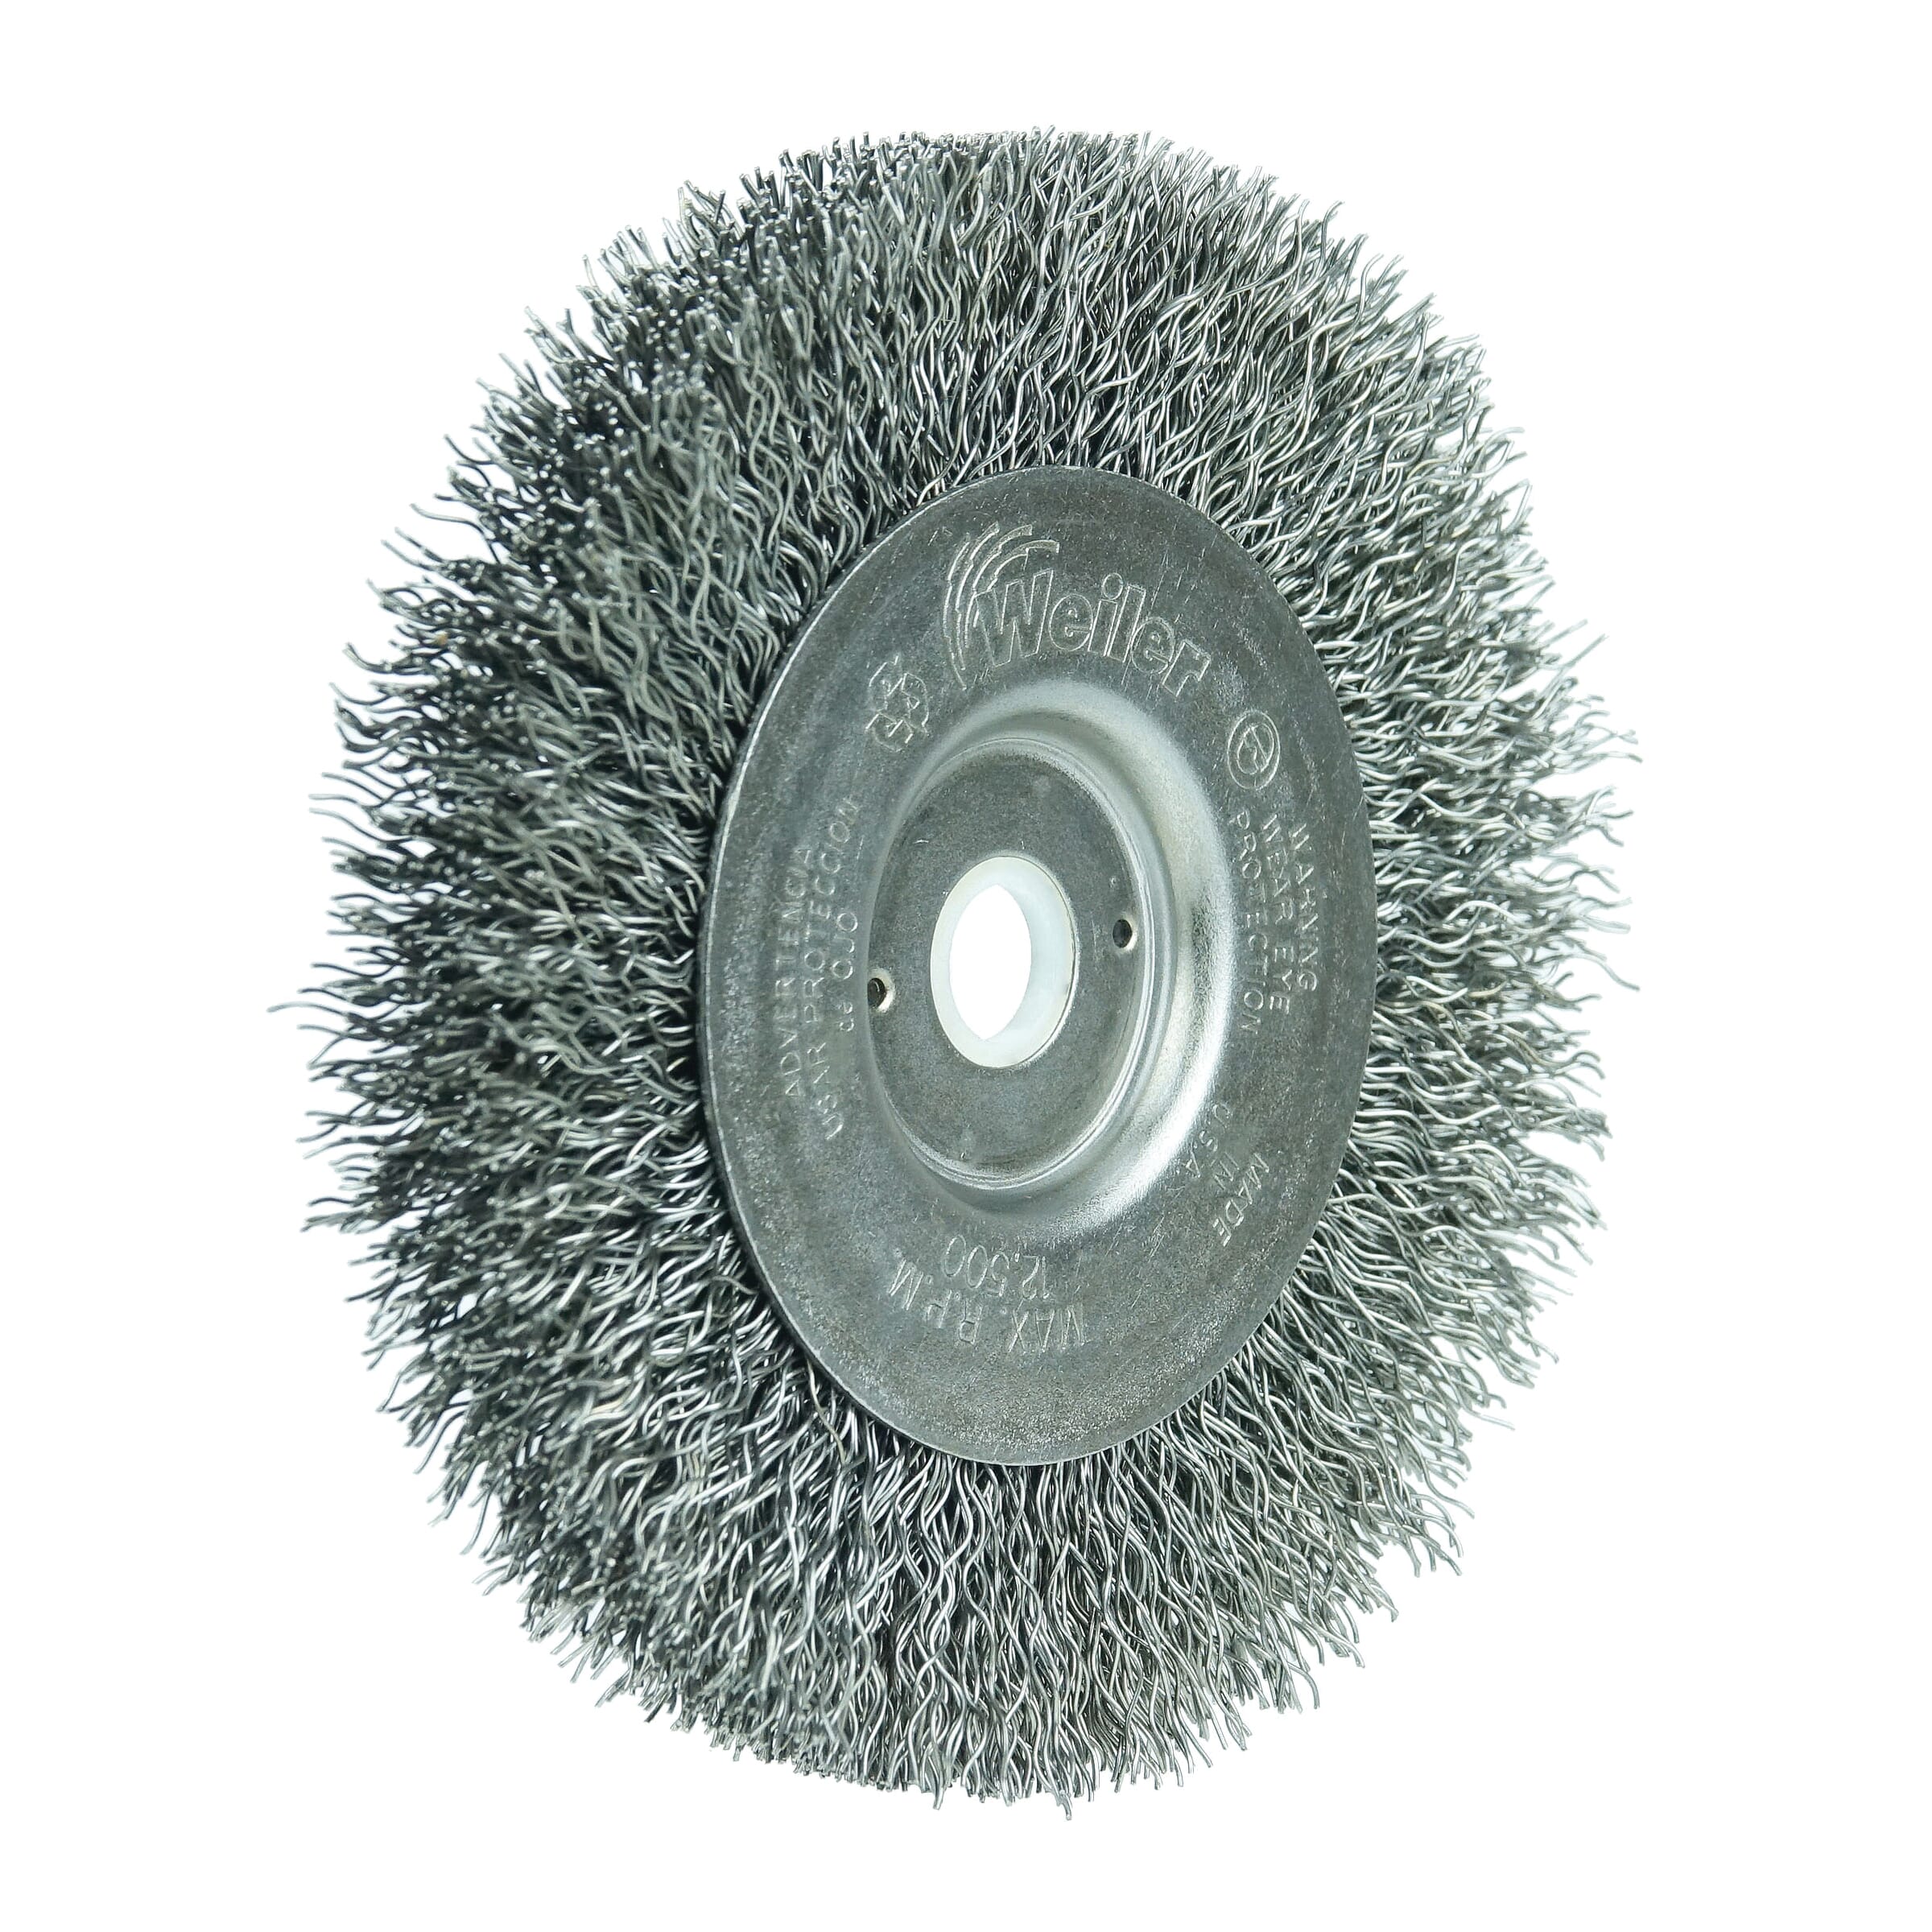 Weiler® 00144 Narrow Face Wheel Brush, 4 in Dia Brush, 1/2 in W Face, 0.014 in Dia Crimped Filament/Wire, 1/2 to 3/8 in Arbor Hole